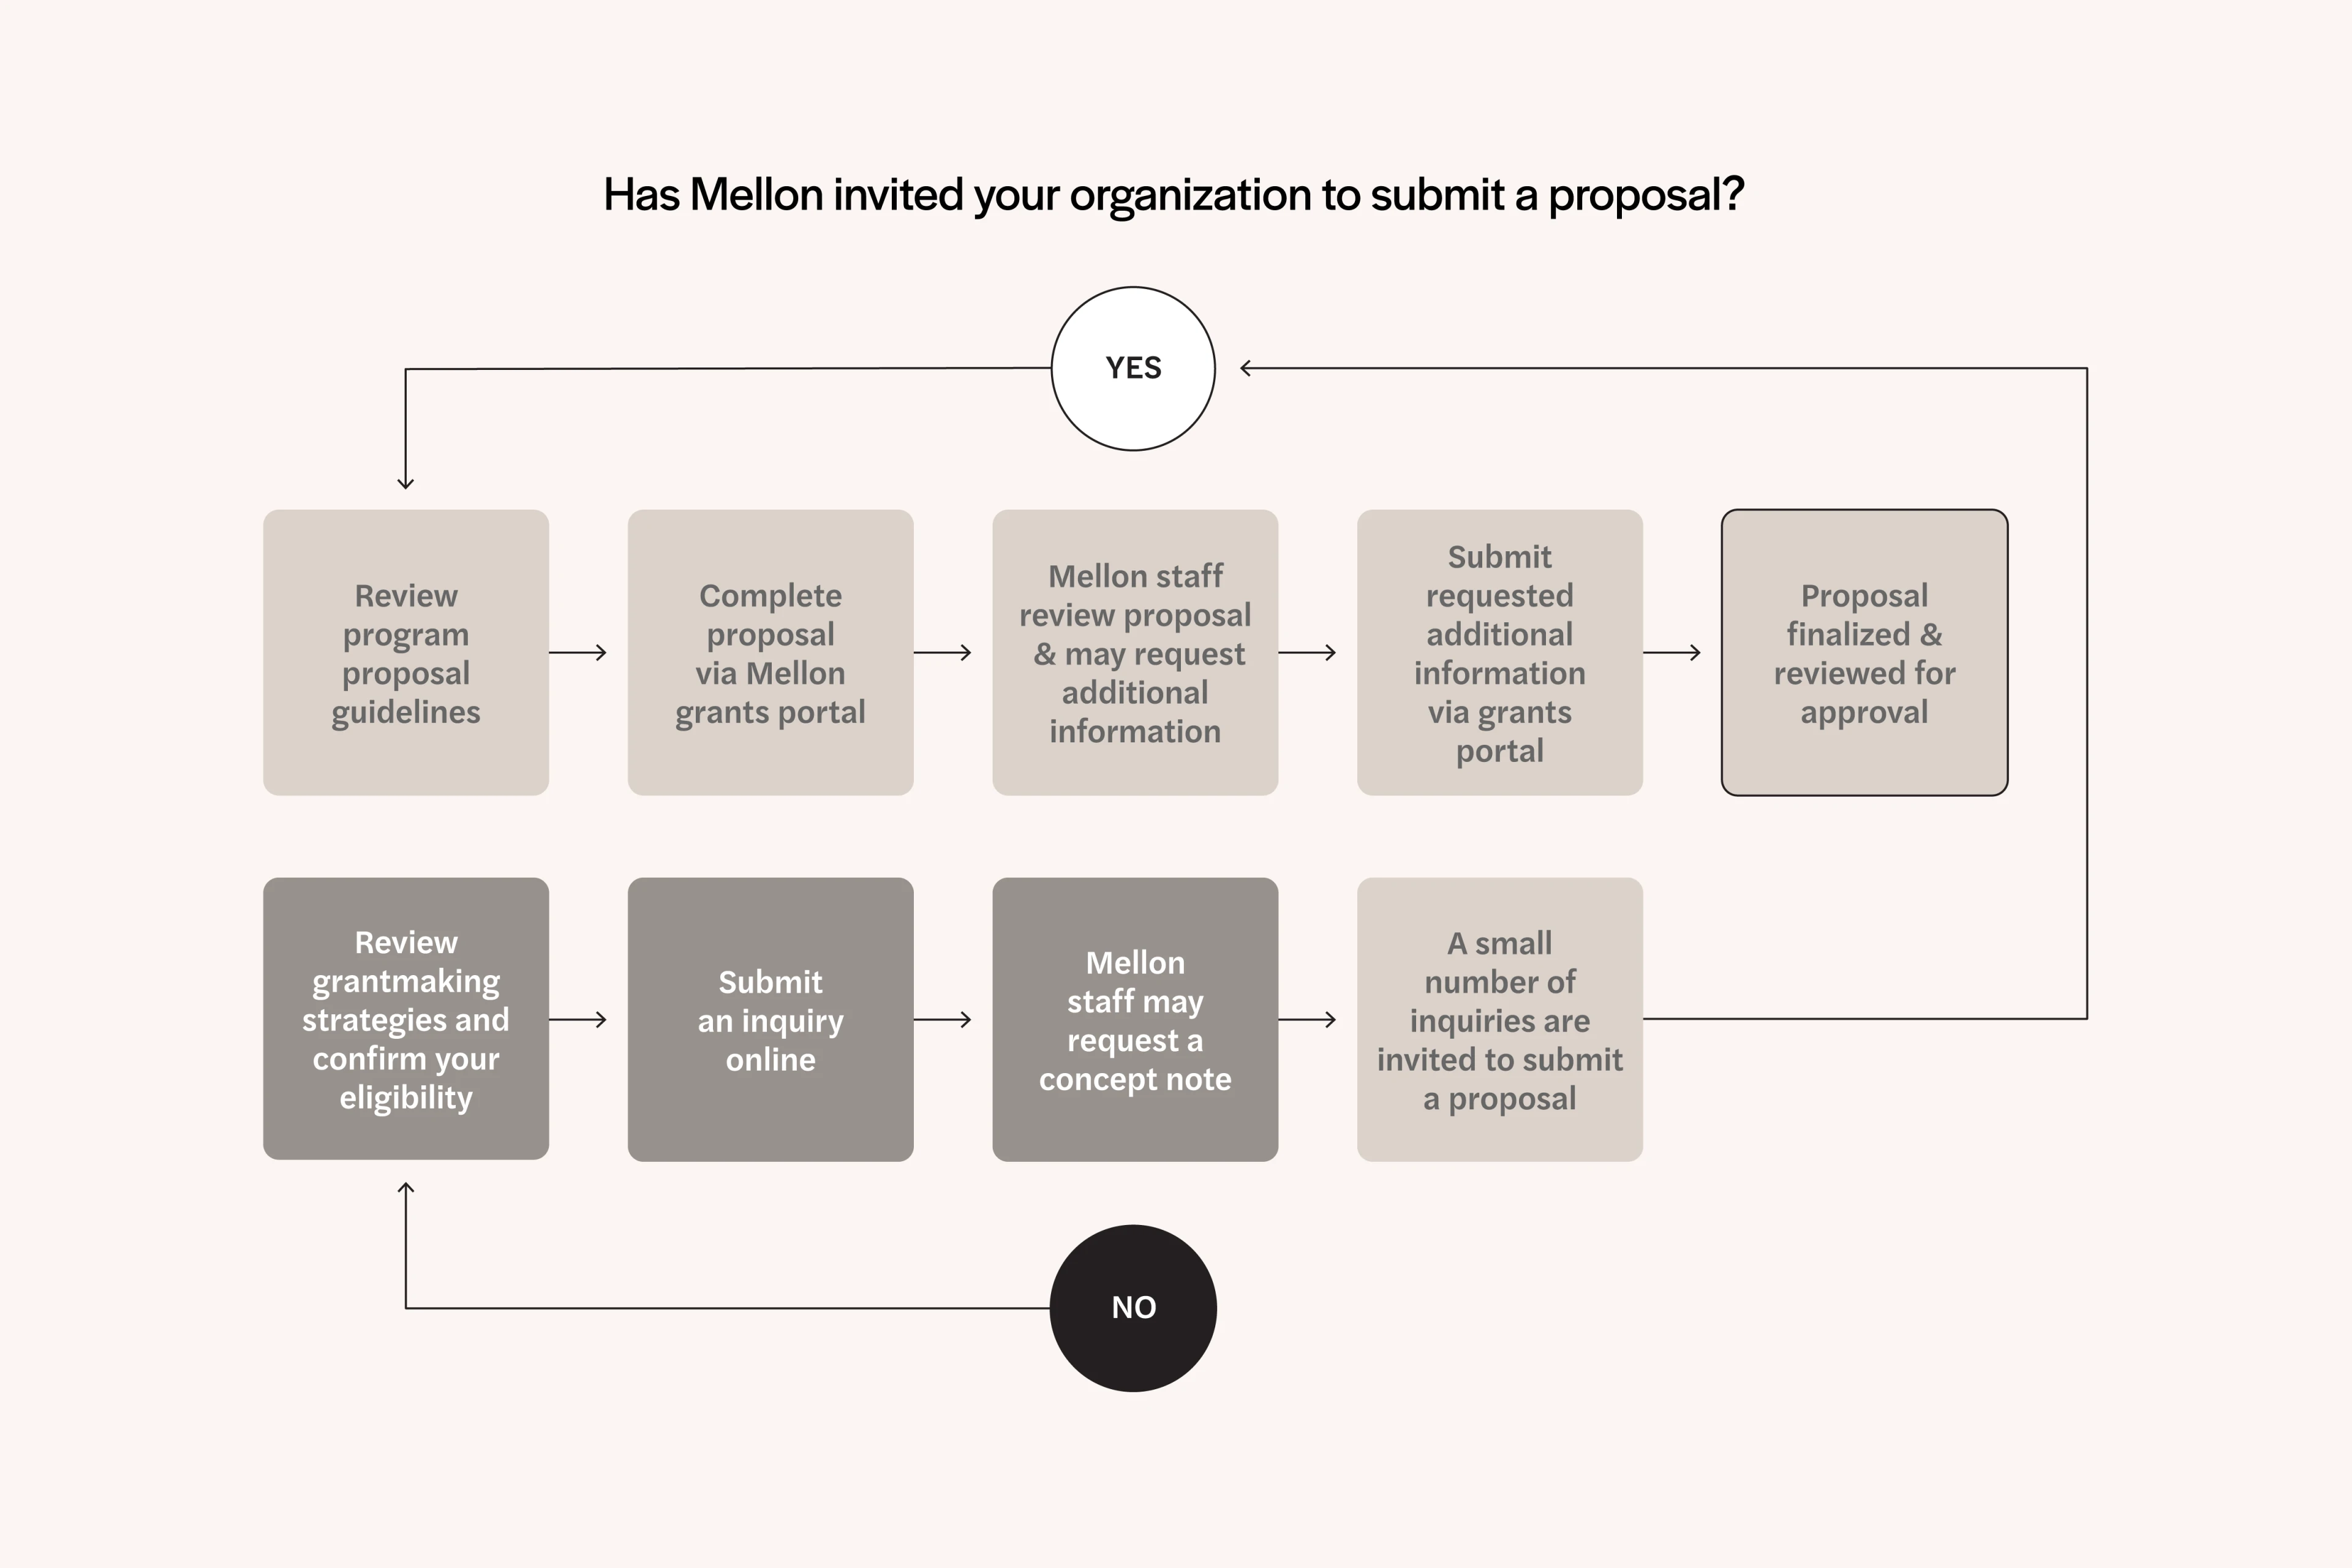 A flow chart that shows the key events that take place during Mellon's grant application process